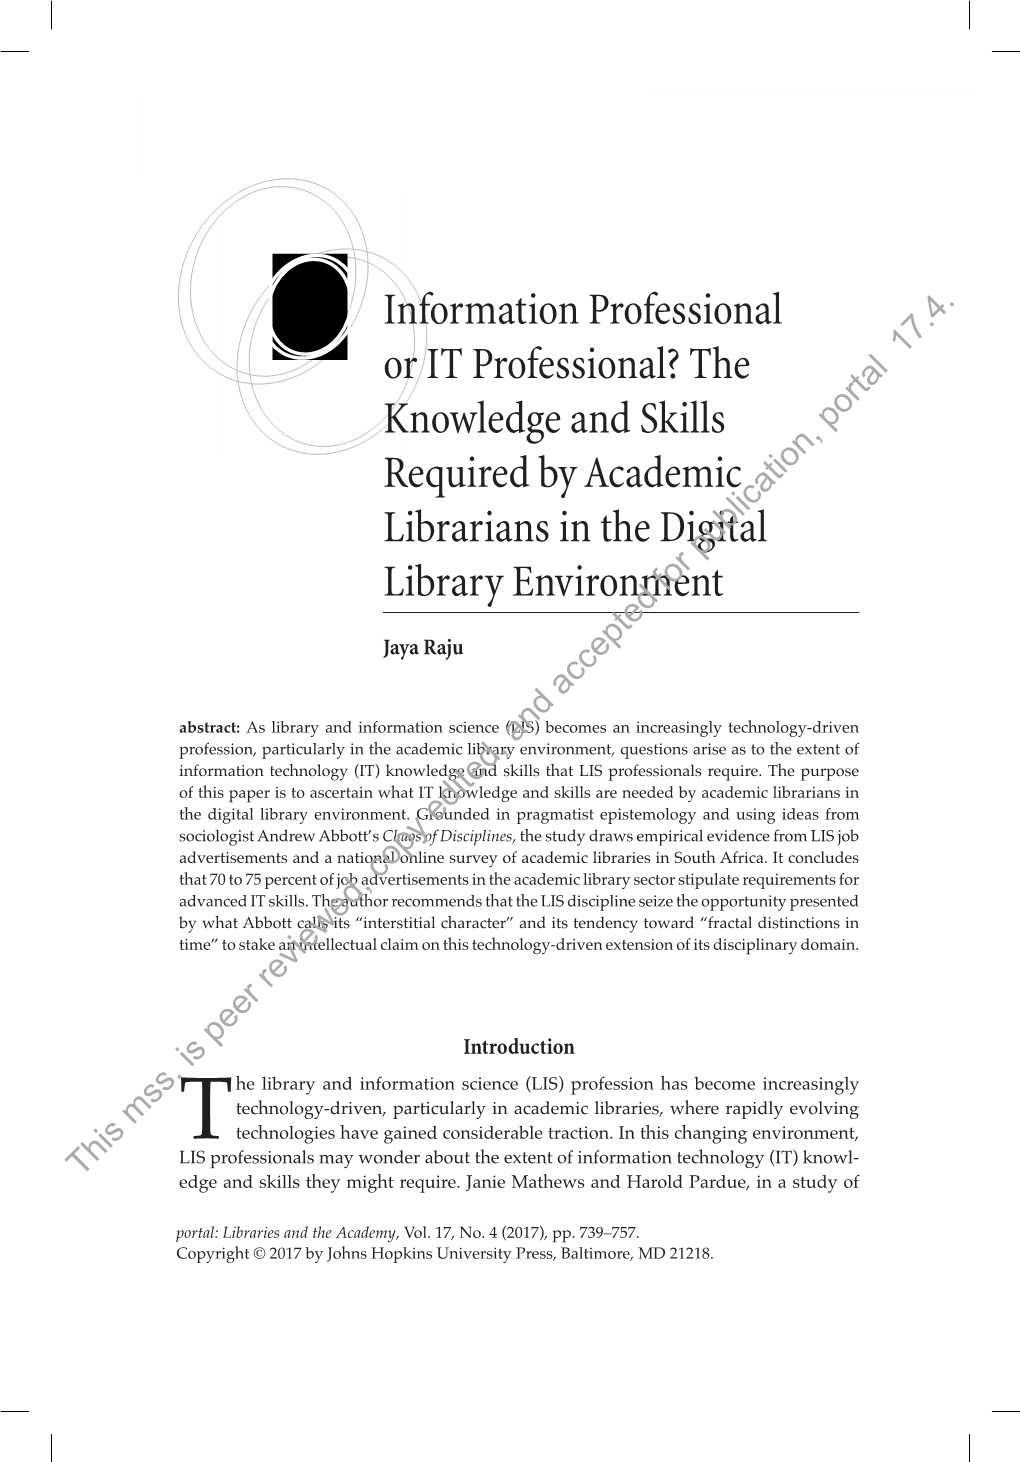 Information Professional Or IT Professional? the Knowledge And